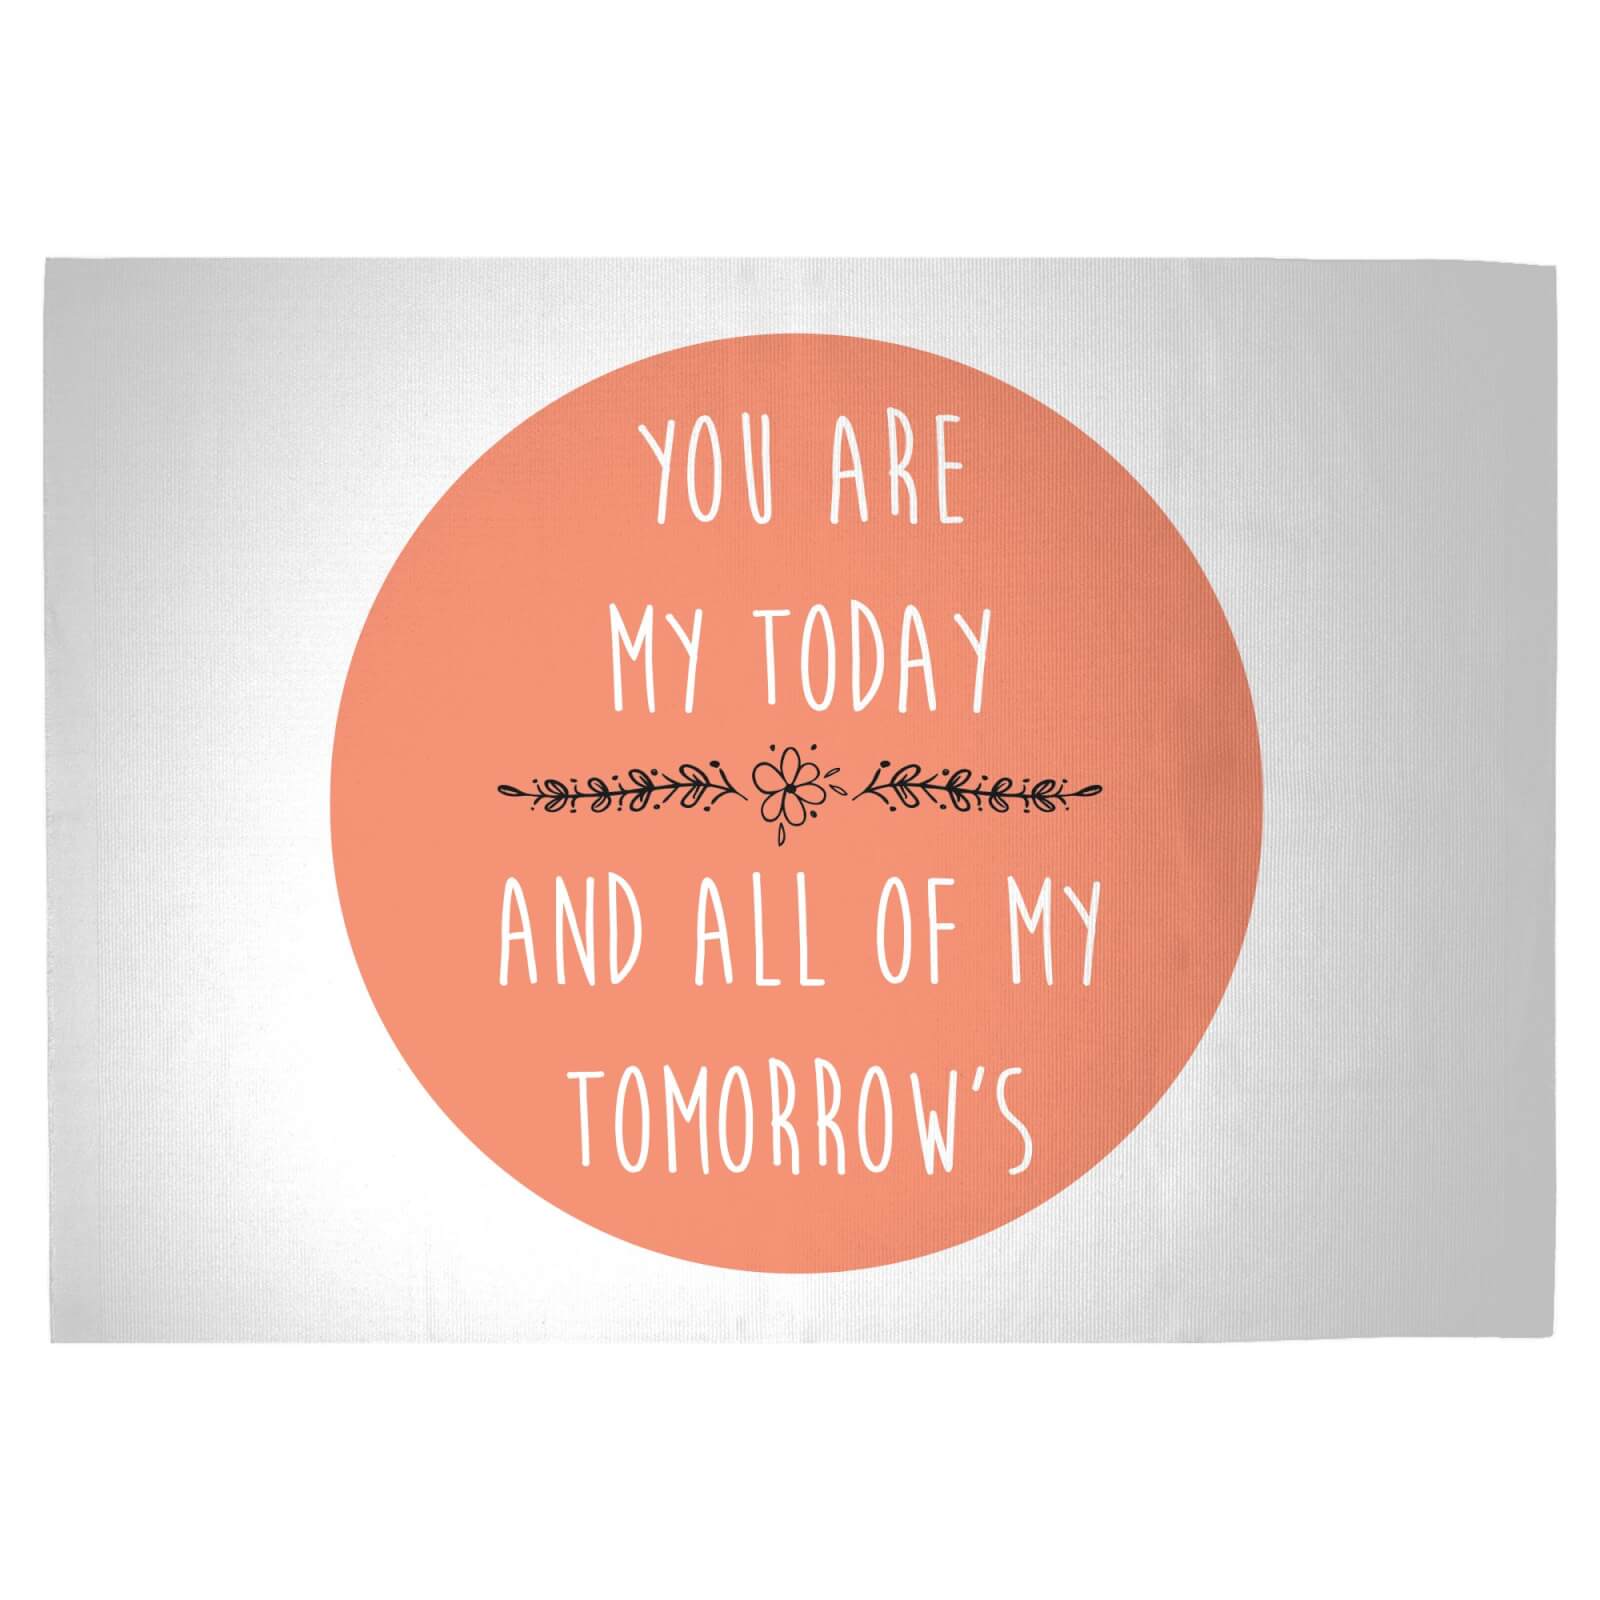 You Are My Today And All Of My Tomorrow's Woven Rug - Large